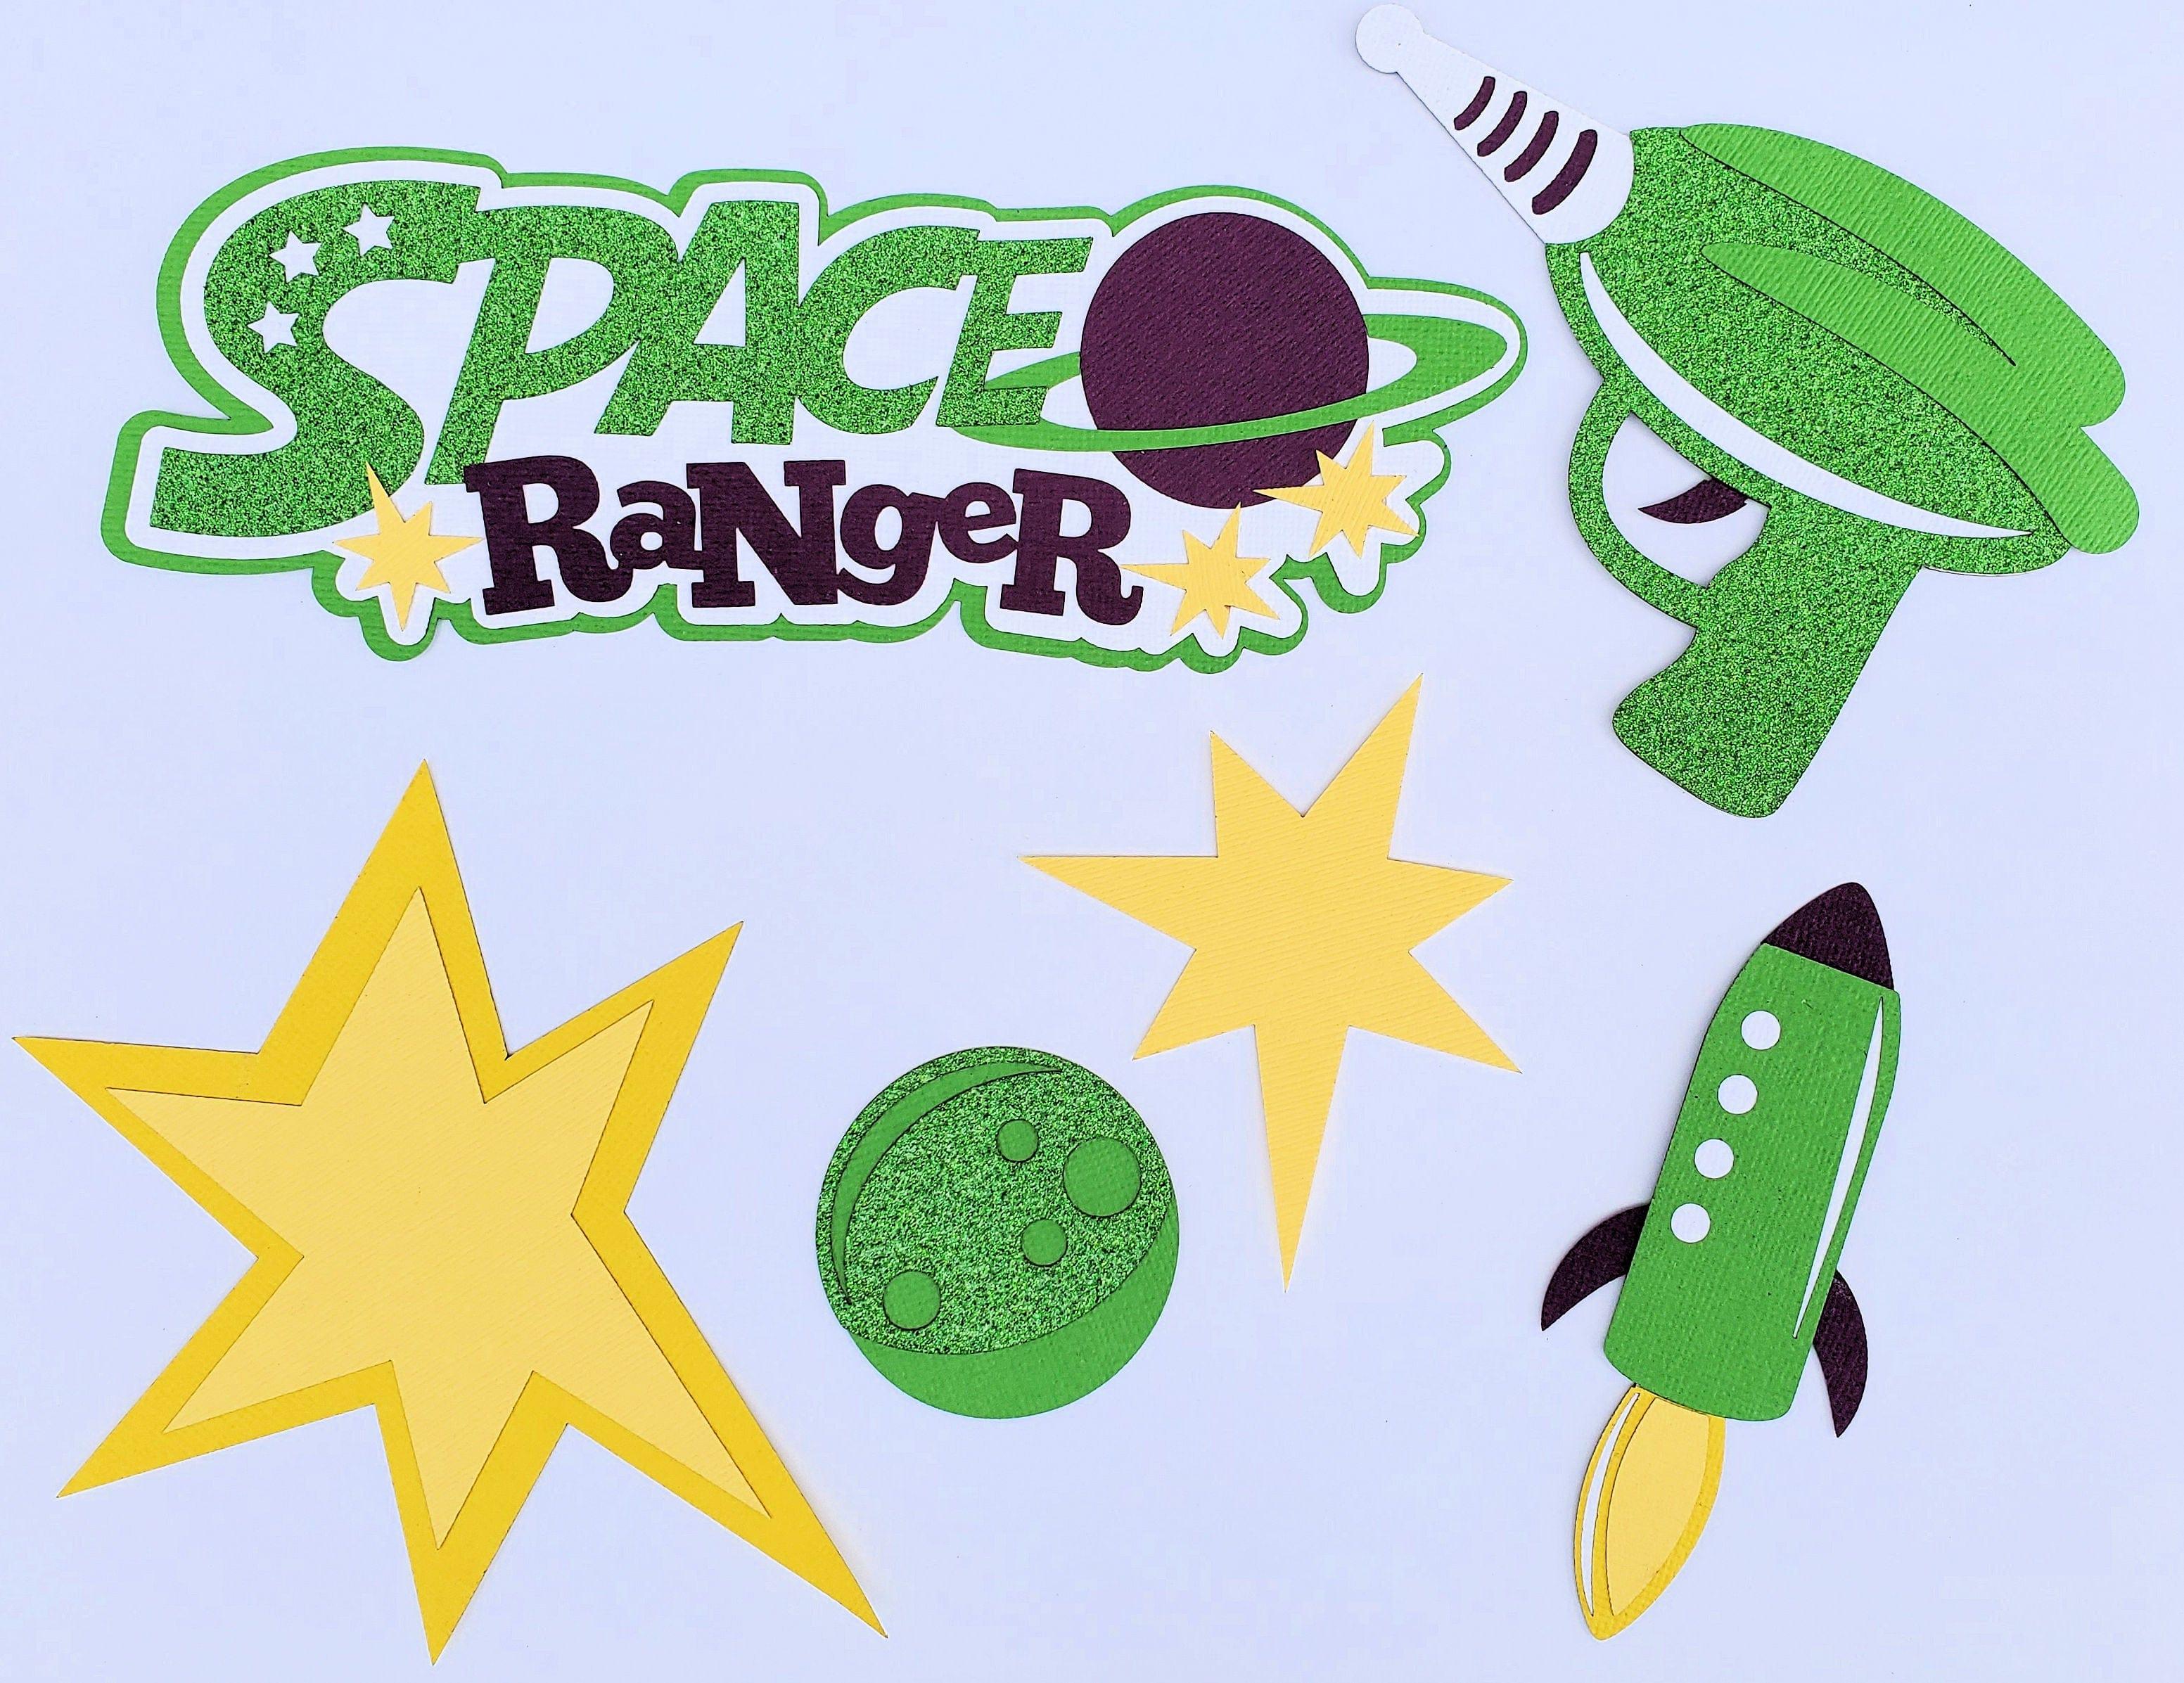 Space Ranger Toy Land Set of 6 Fully-Assembled Cuts Scrapbook Embellishment by SSC Laser Designs